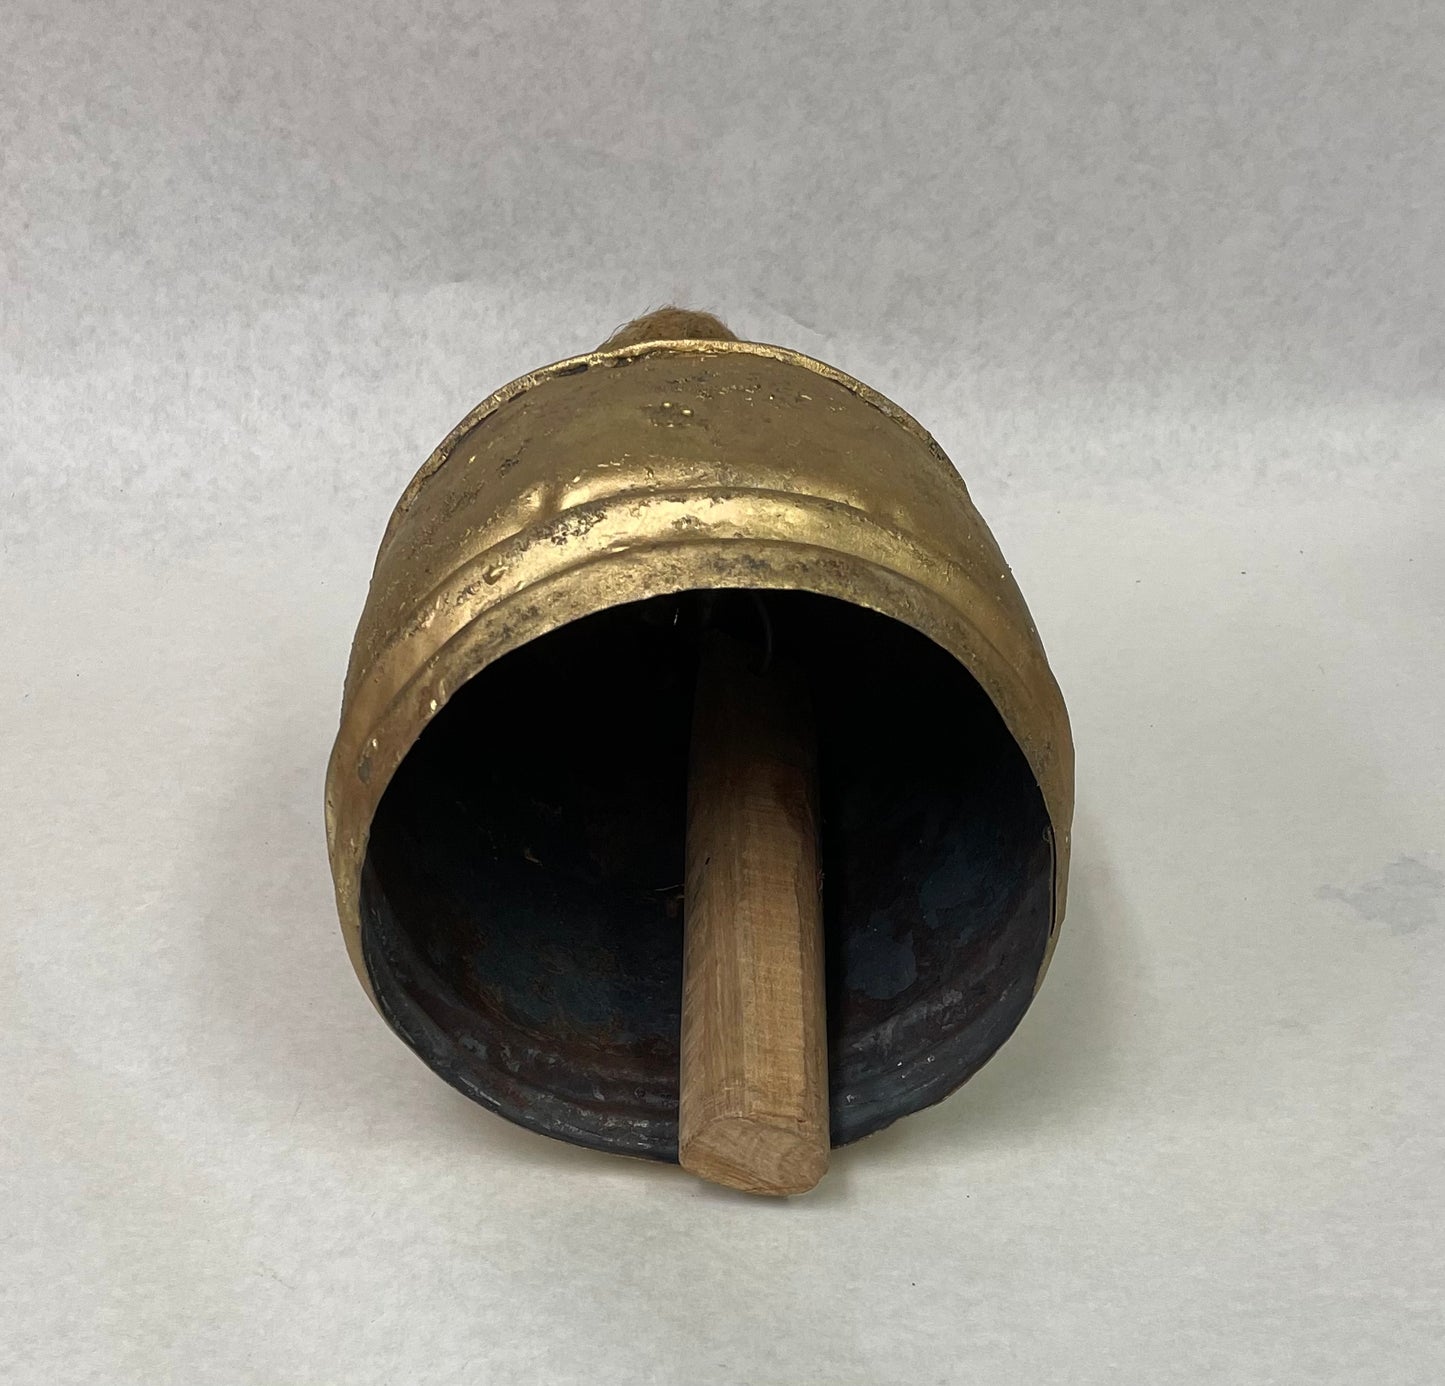 Dome Tin Bell with Wooden Striker, 4" x 3"